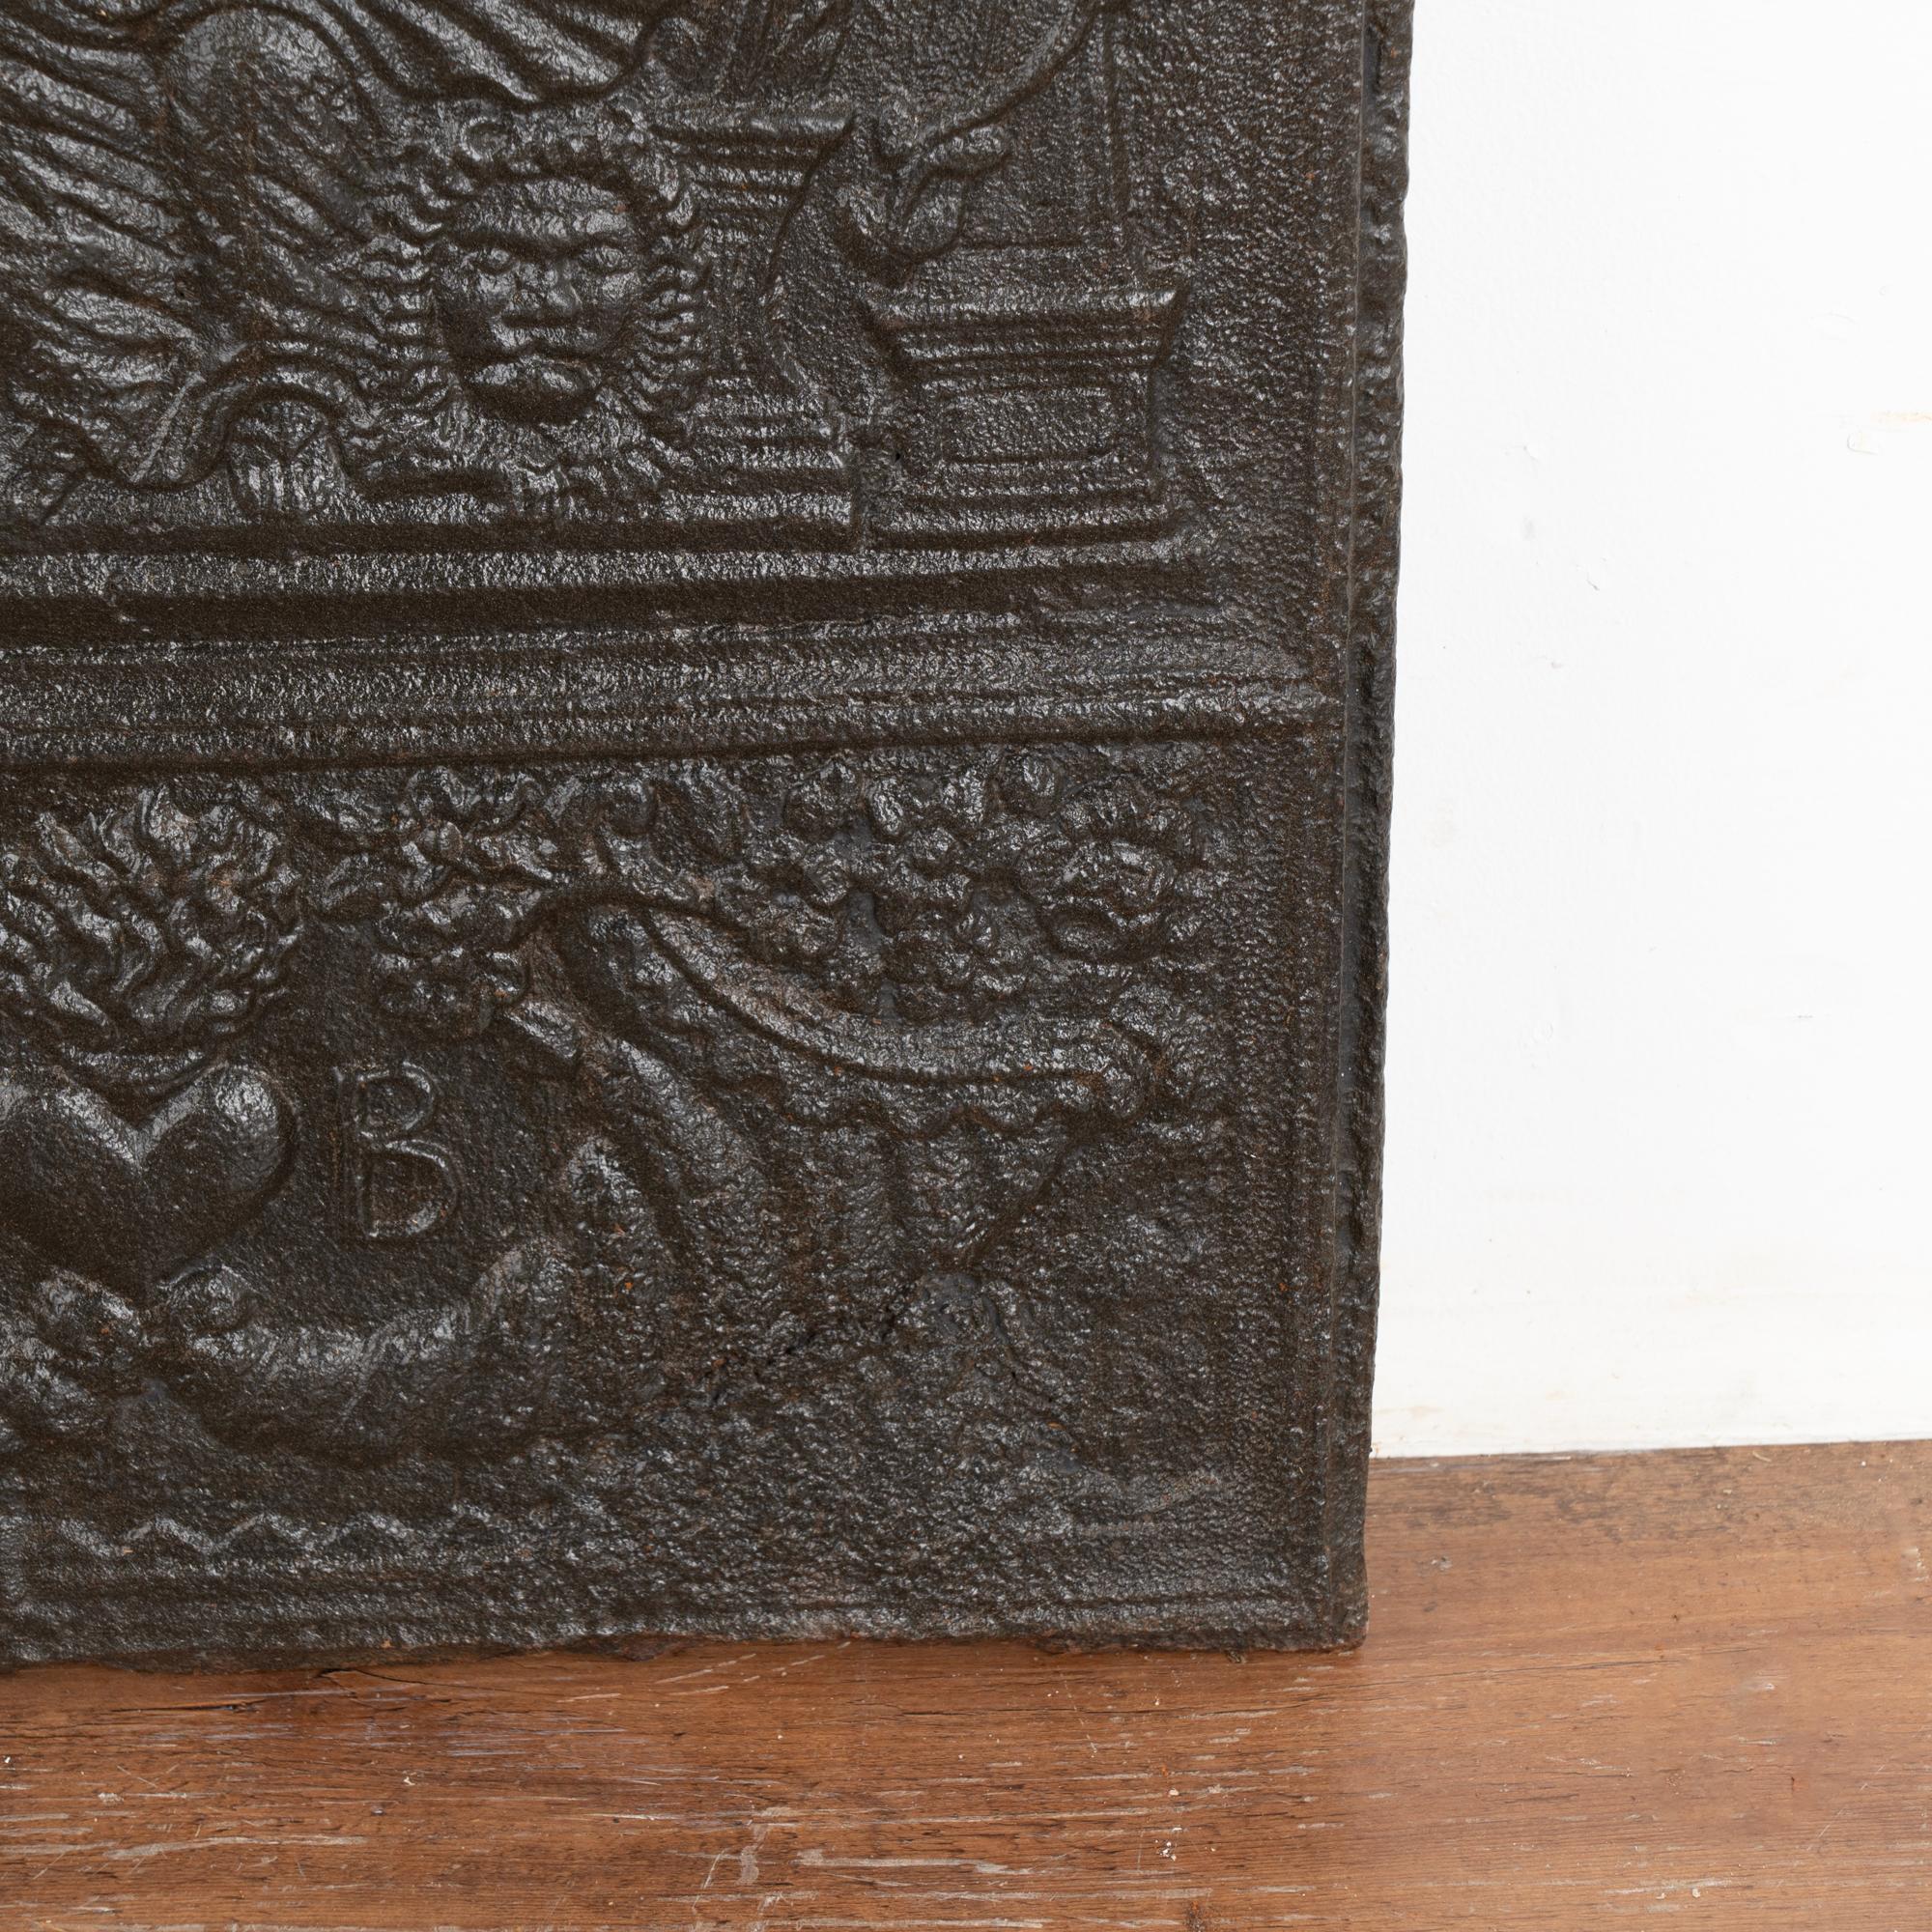 Decorative Cast Iron Fire Back With Queen, Sweden circa 1760-80 For Sale 4